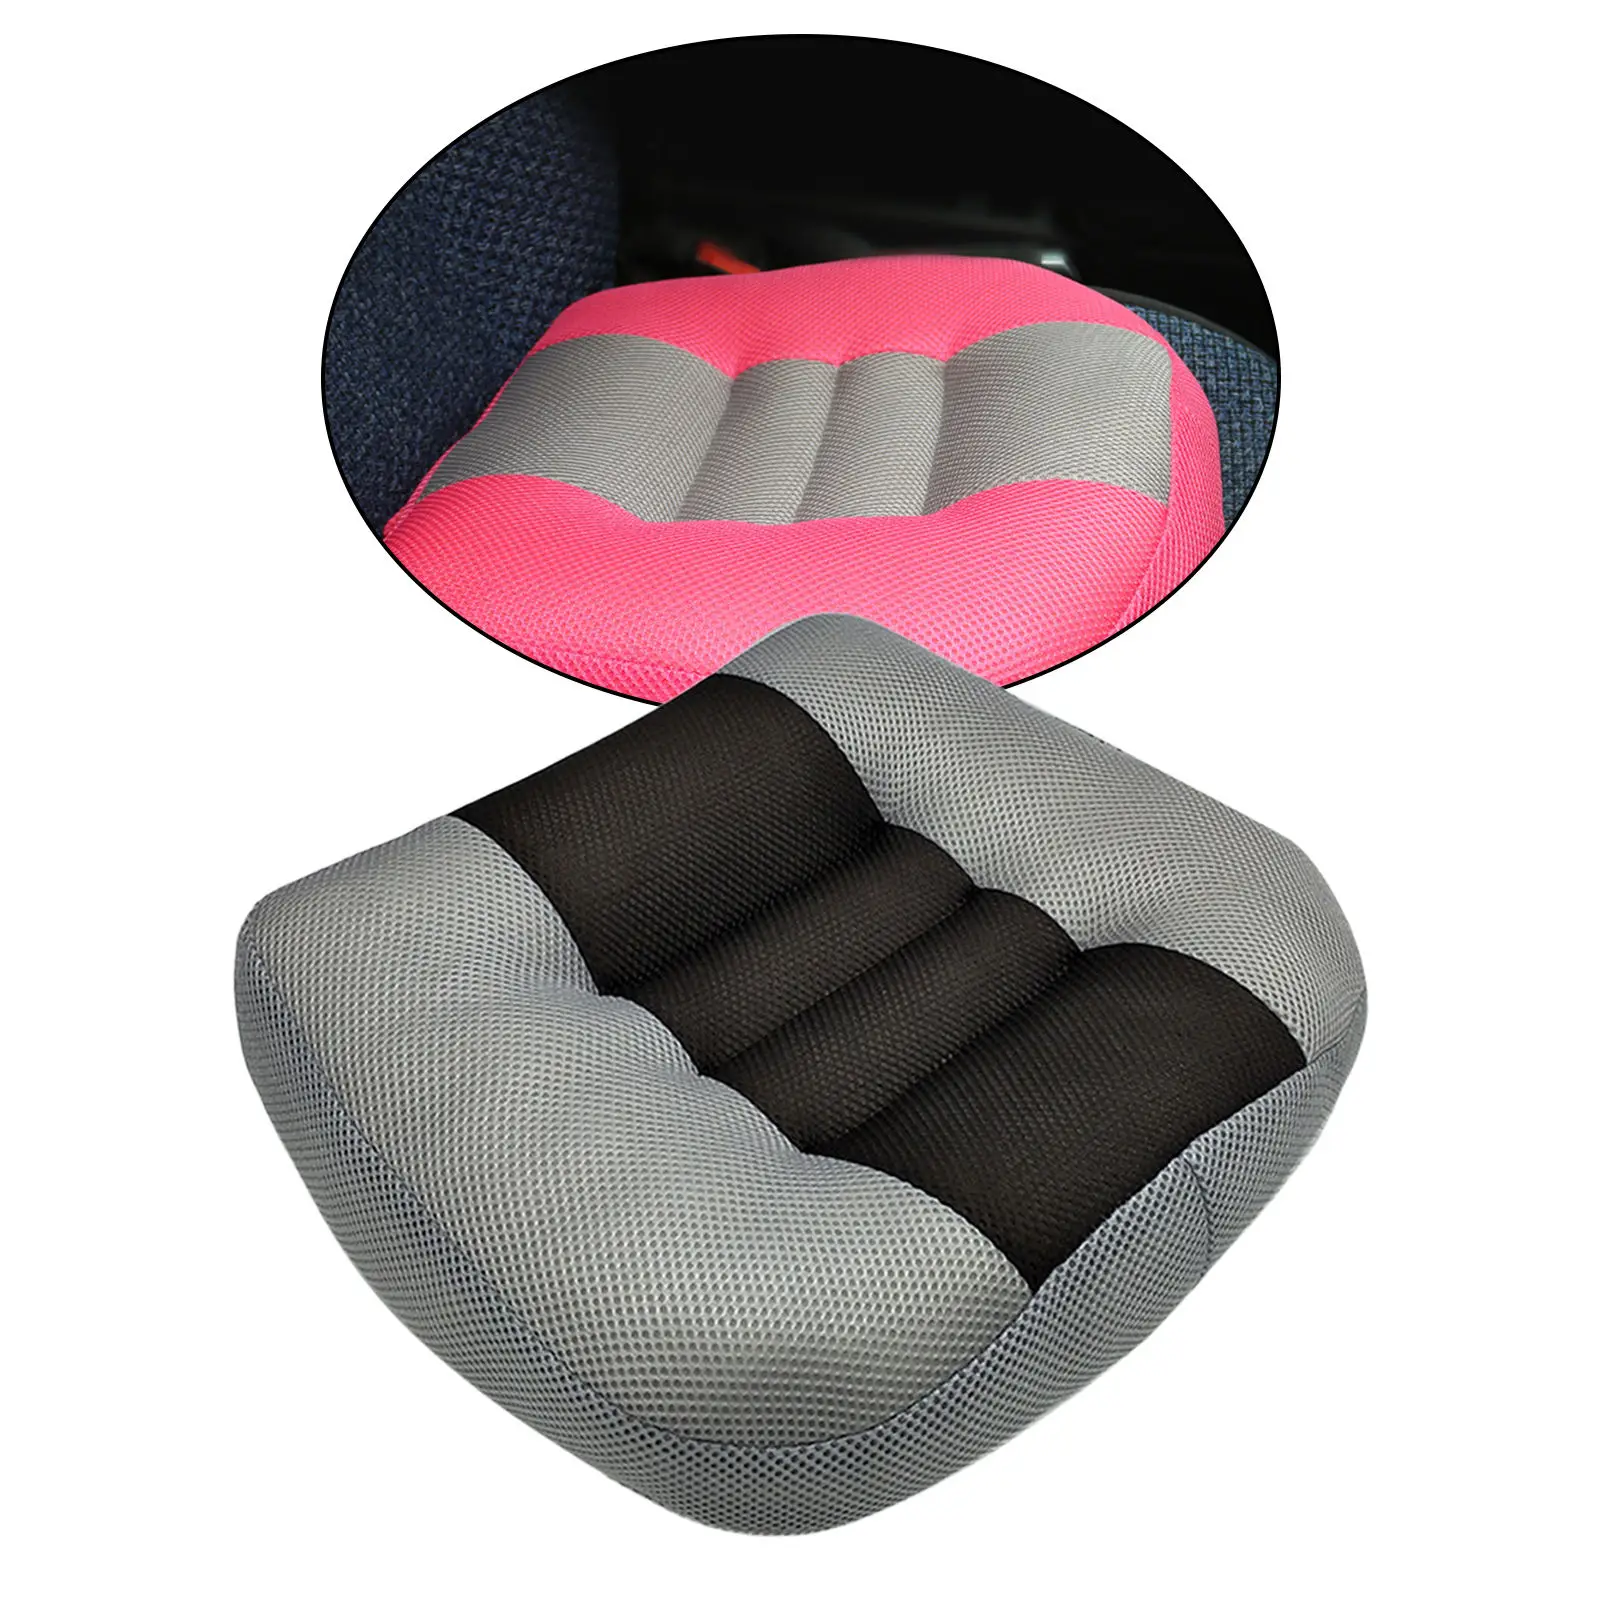 https://ae01.alicdn.com/kf/H5075e3bc21844175bc230044a1676da0W/Car-Seat-Booster-Cushion-Heightening-Height-Boost-Mat-Breathable-Mesh-Driver-Expand-Field-Of-View-Seat.jpg